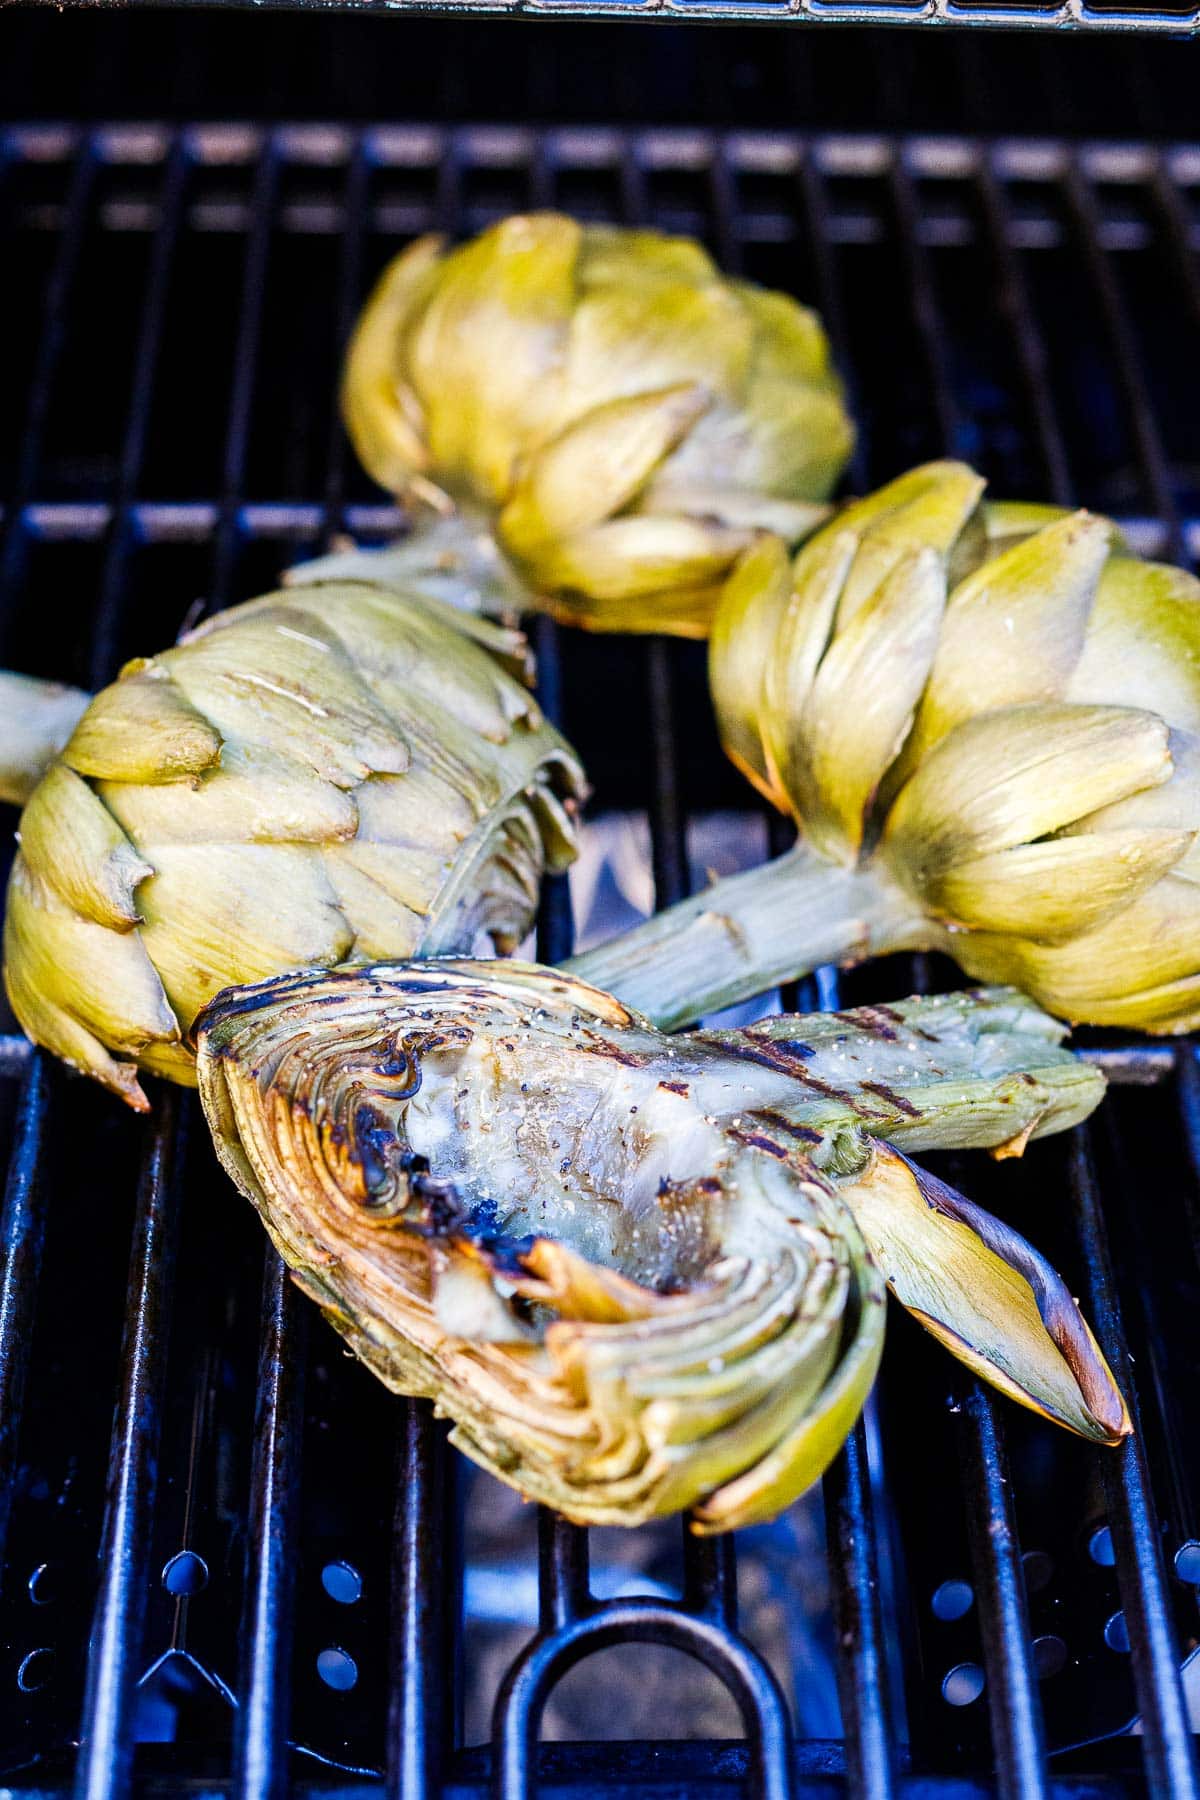 grilled artichokes face down on grill.